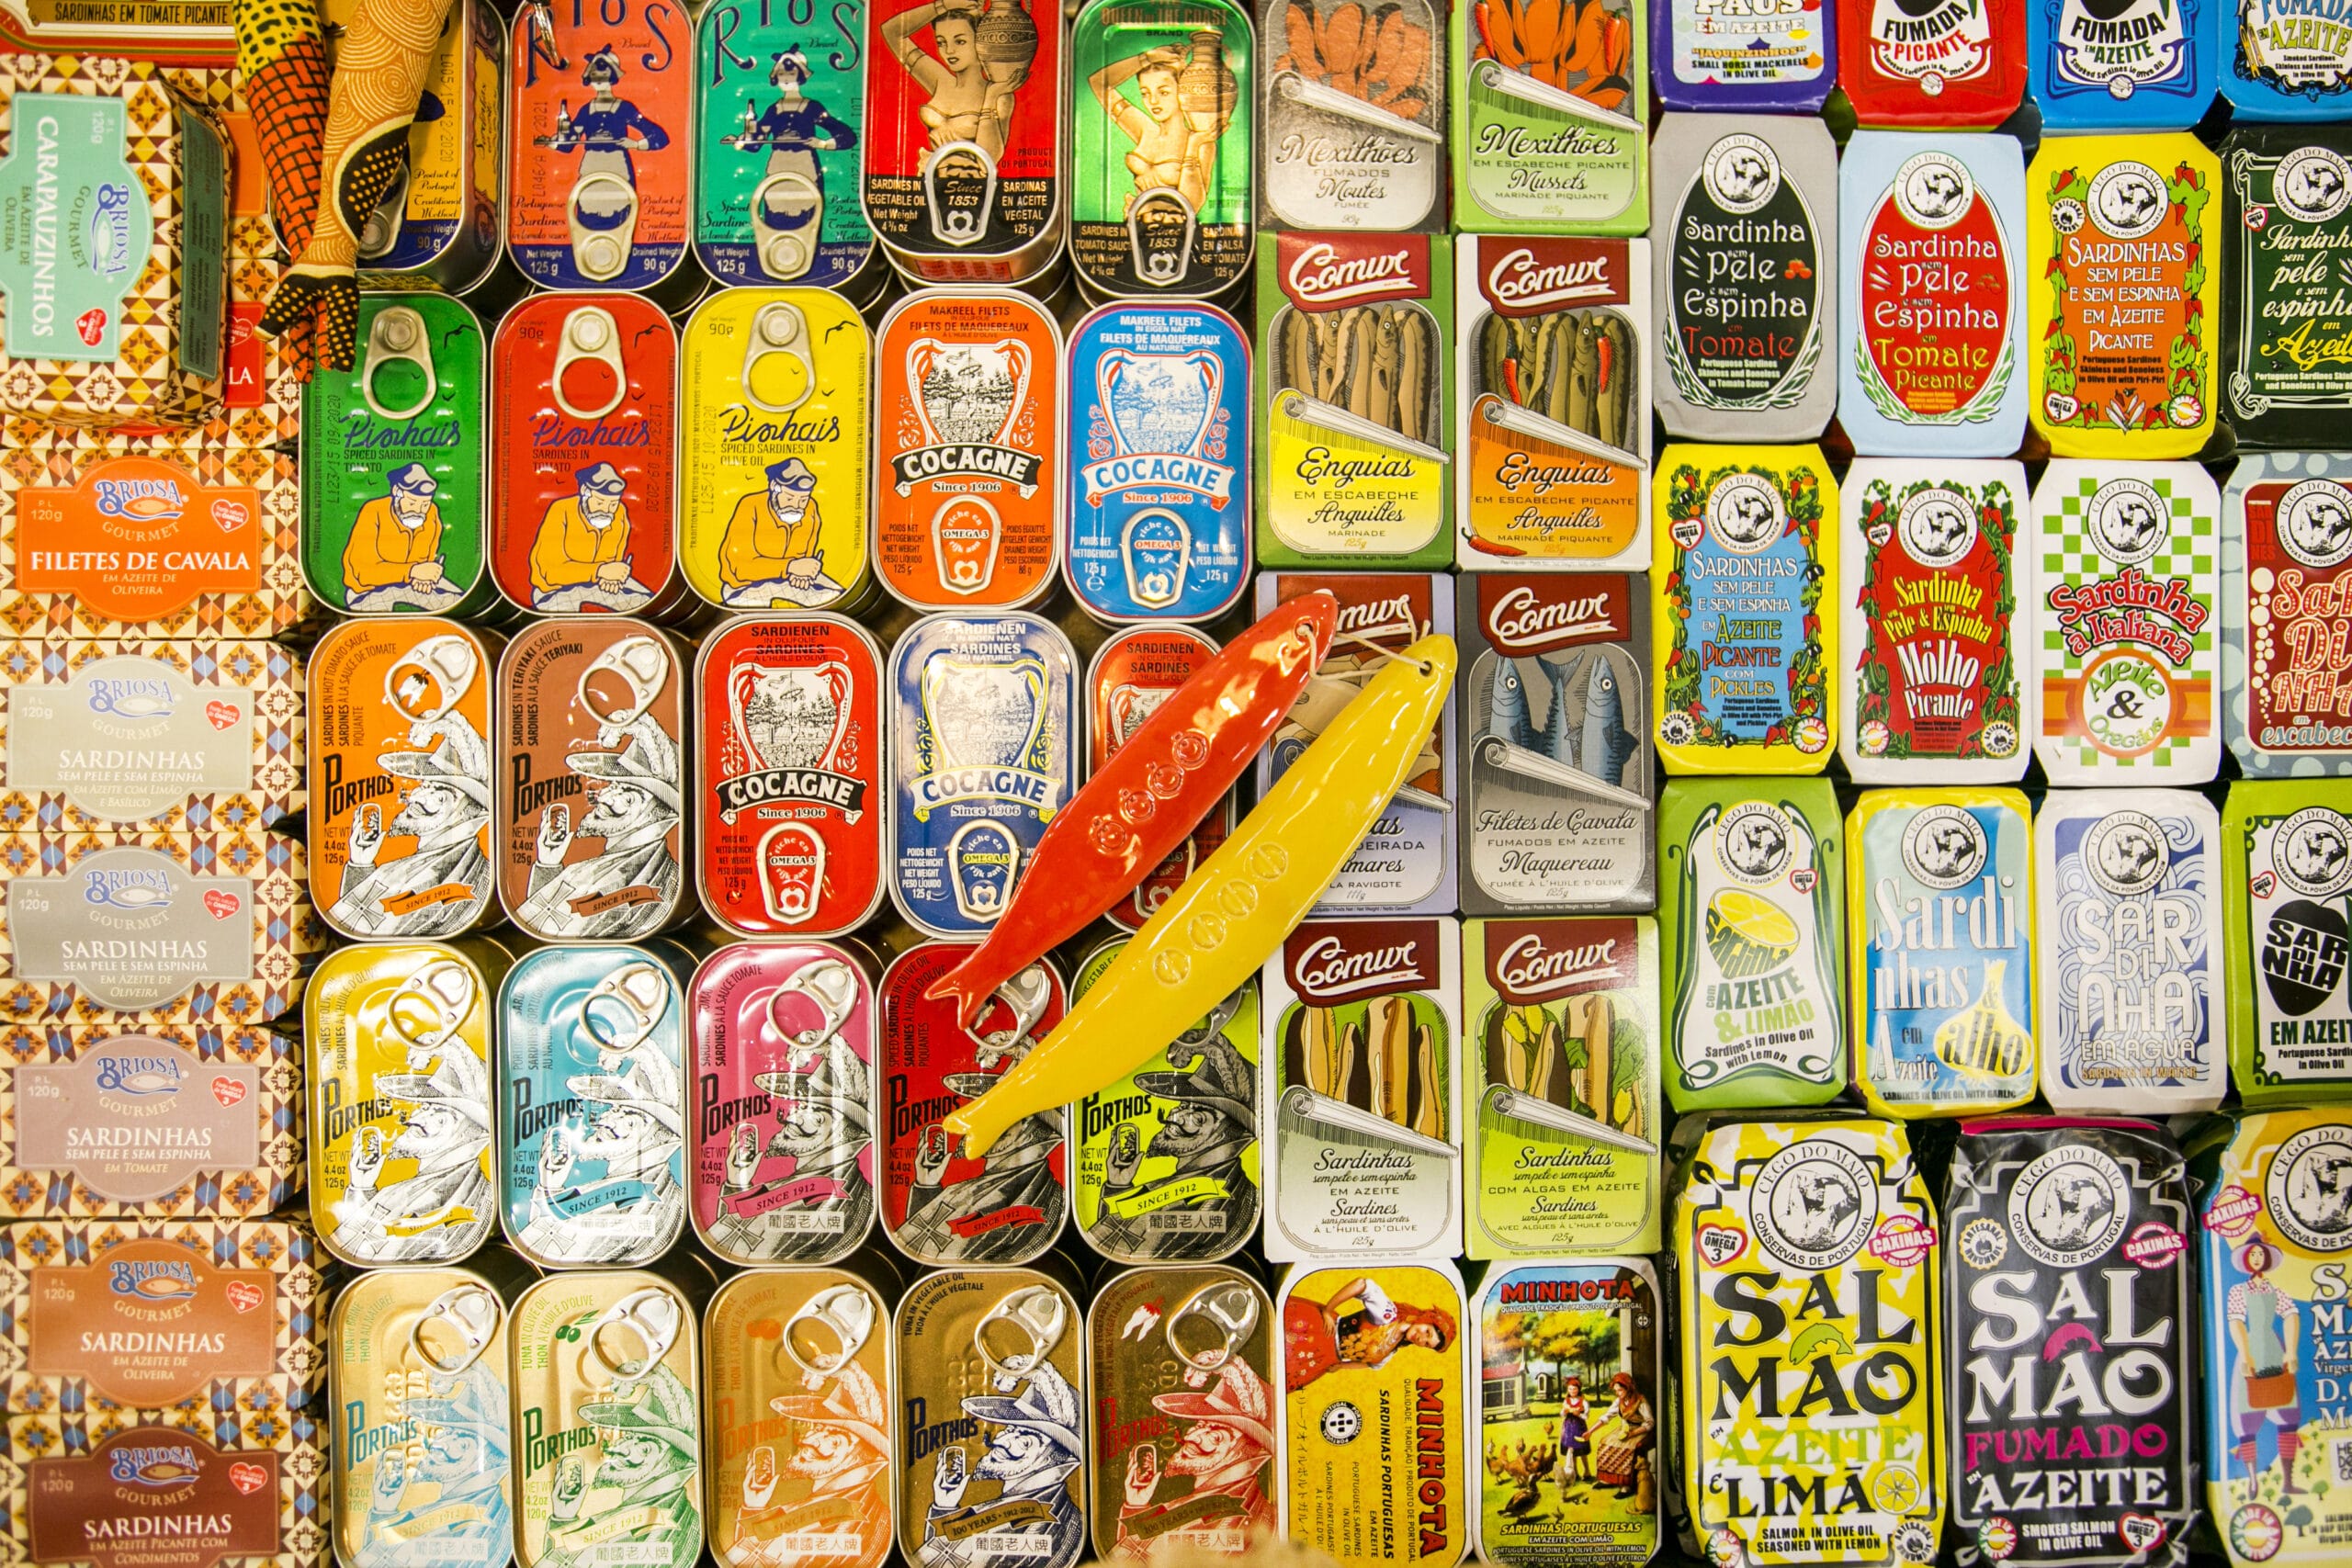 Get the inside story about one of Portugal's most famous culinary products: canned fish